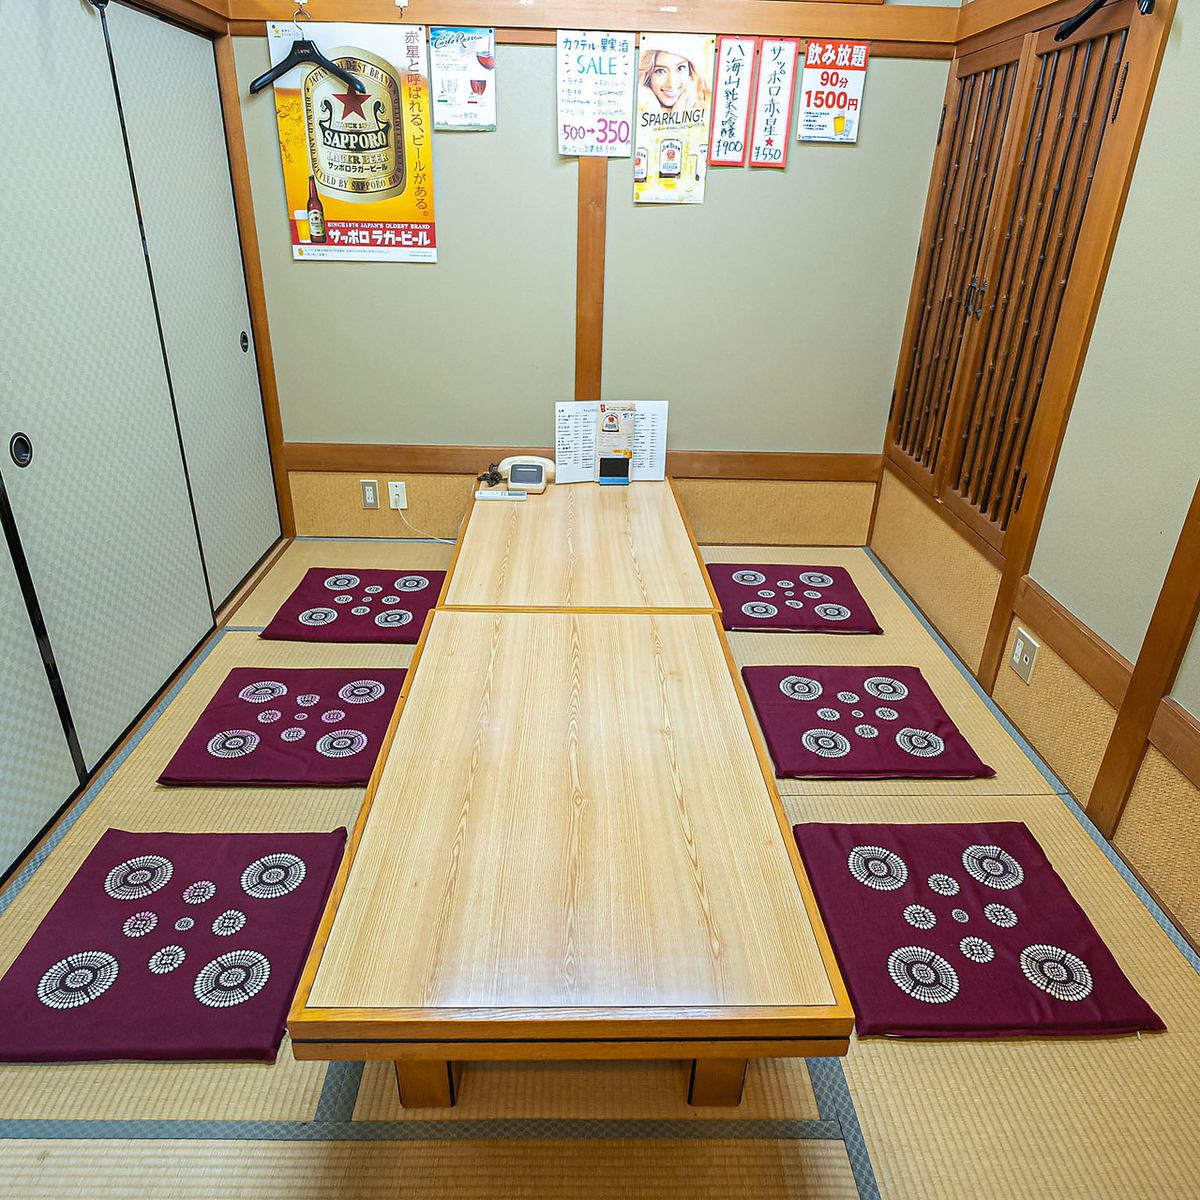 Perfect for dinner parties and company banquets! Enjoy a moment in a Japanese-style space where all seats are tatami mats.